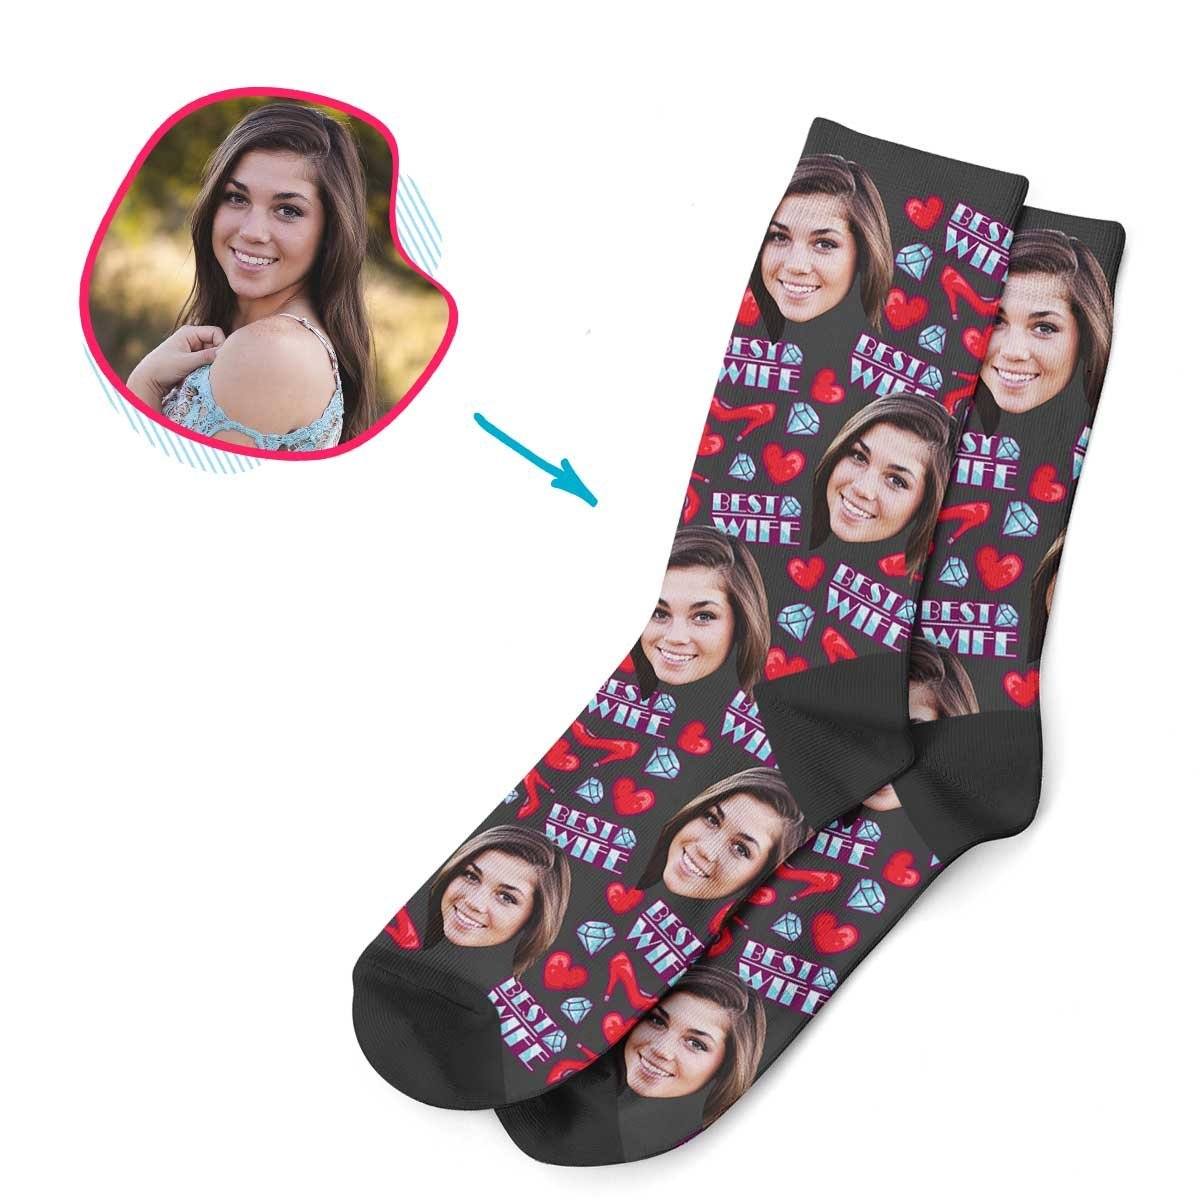 Dark Wife personalized socks with photo of face printed on them